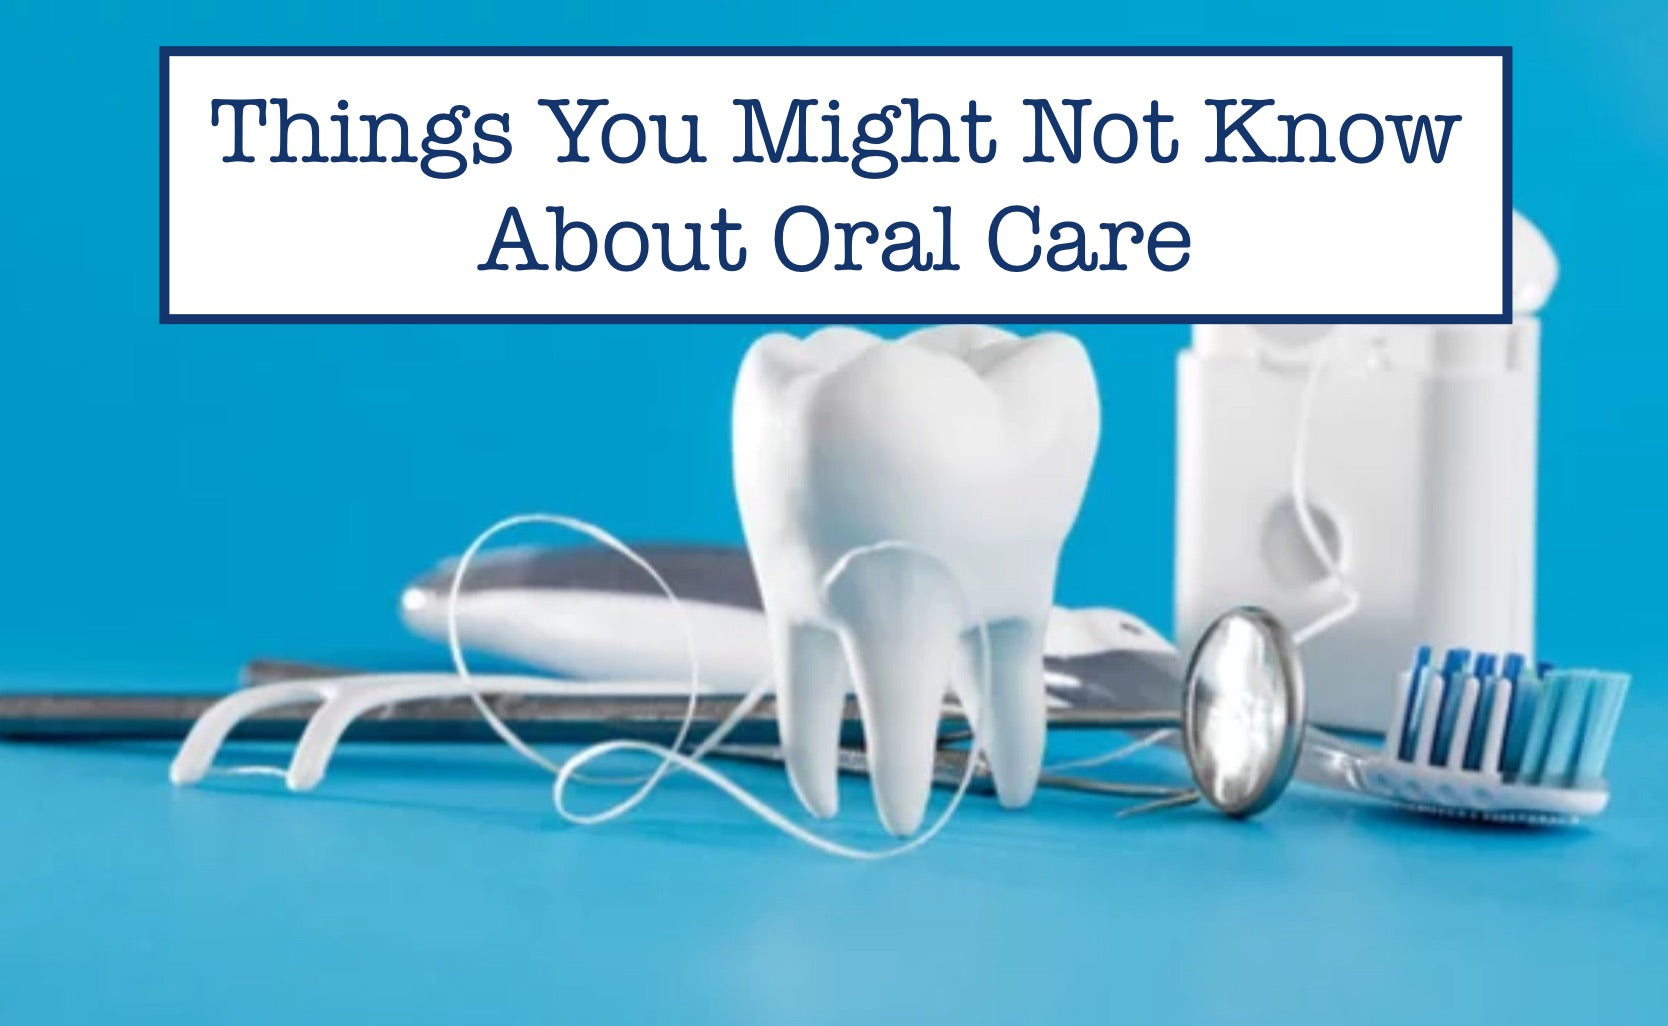 Things You Might Not Know About Oral Care